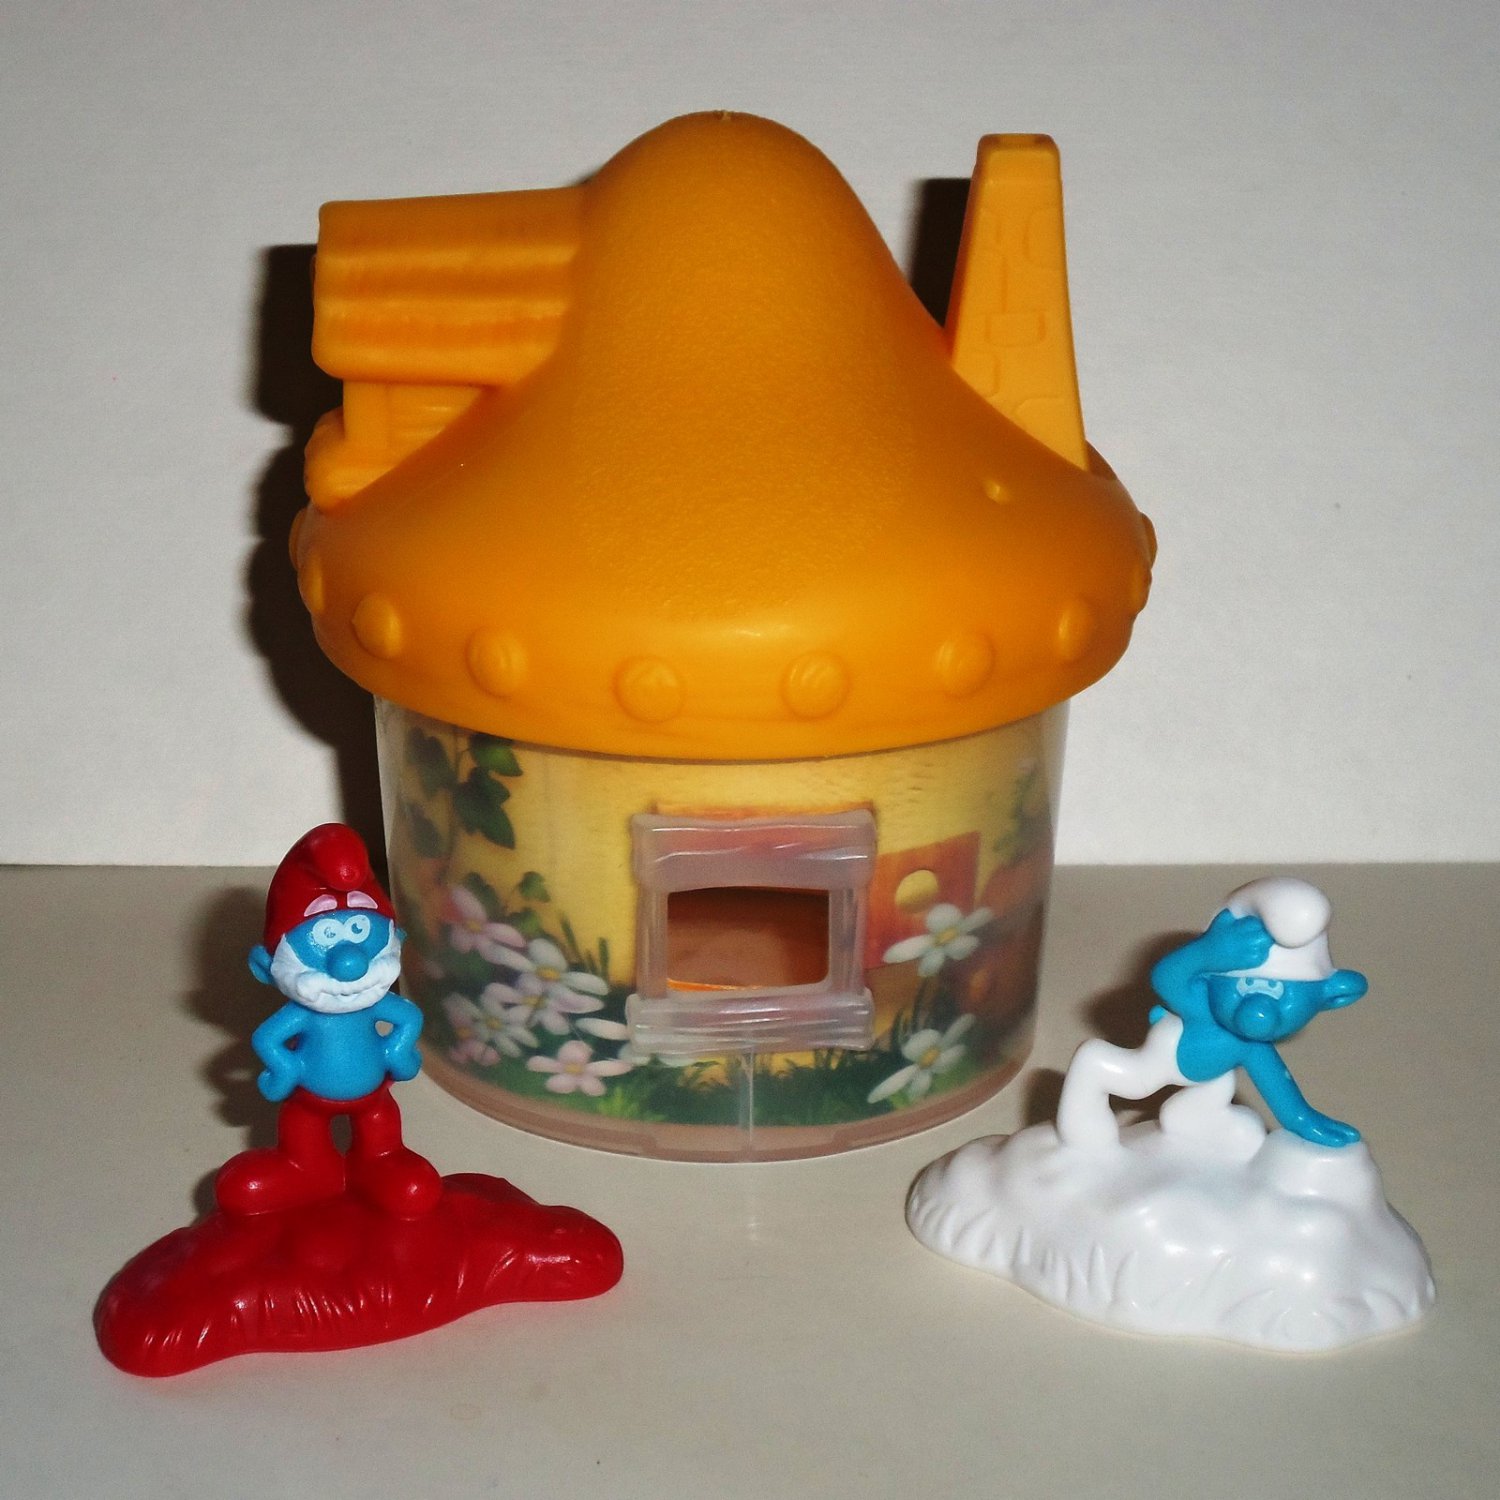 Details about   2017 Mcdonalds Happy Meal Toy Smurfs The Lost Village Orange House